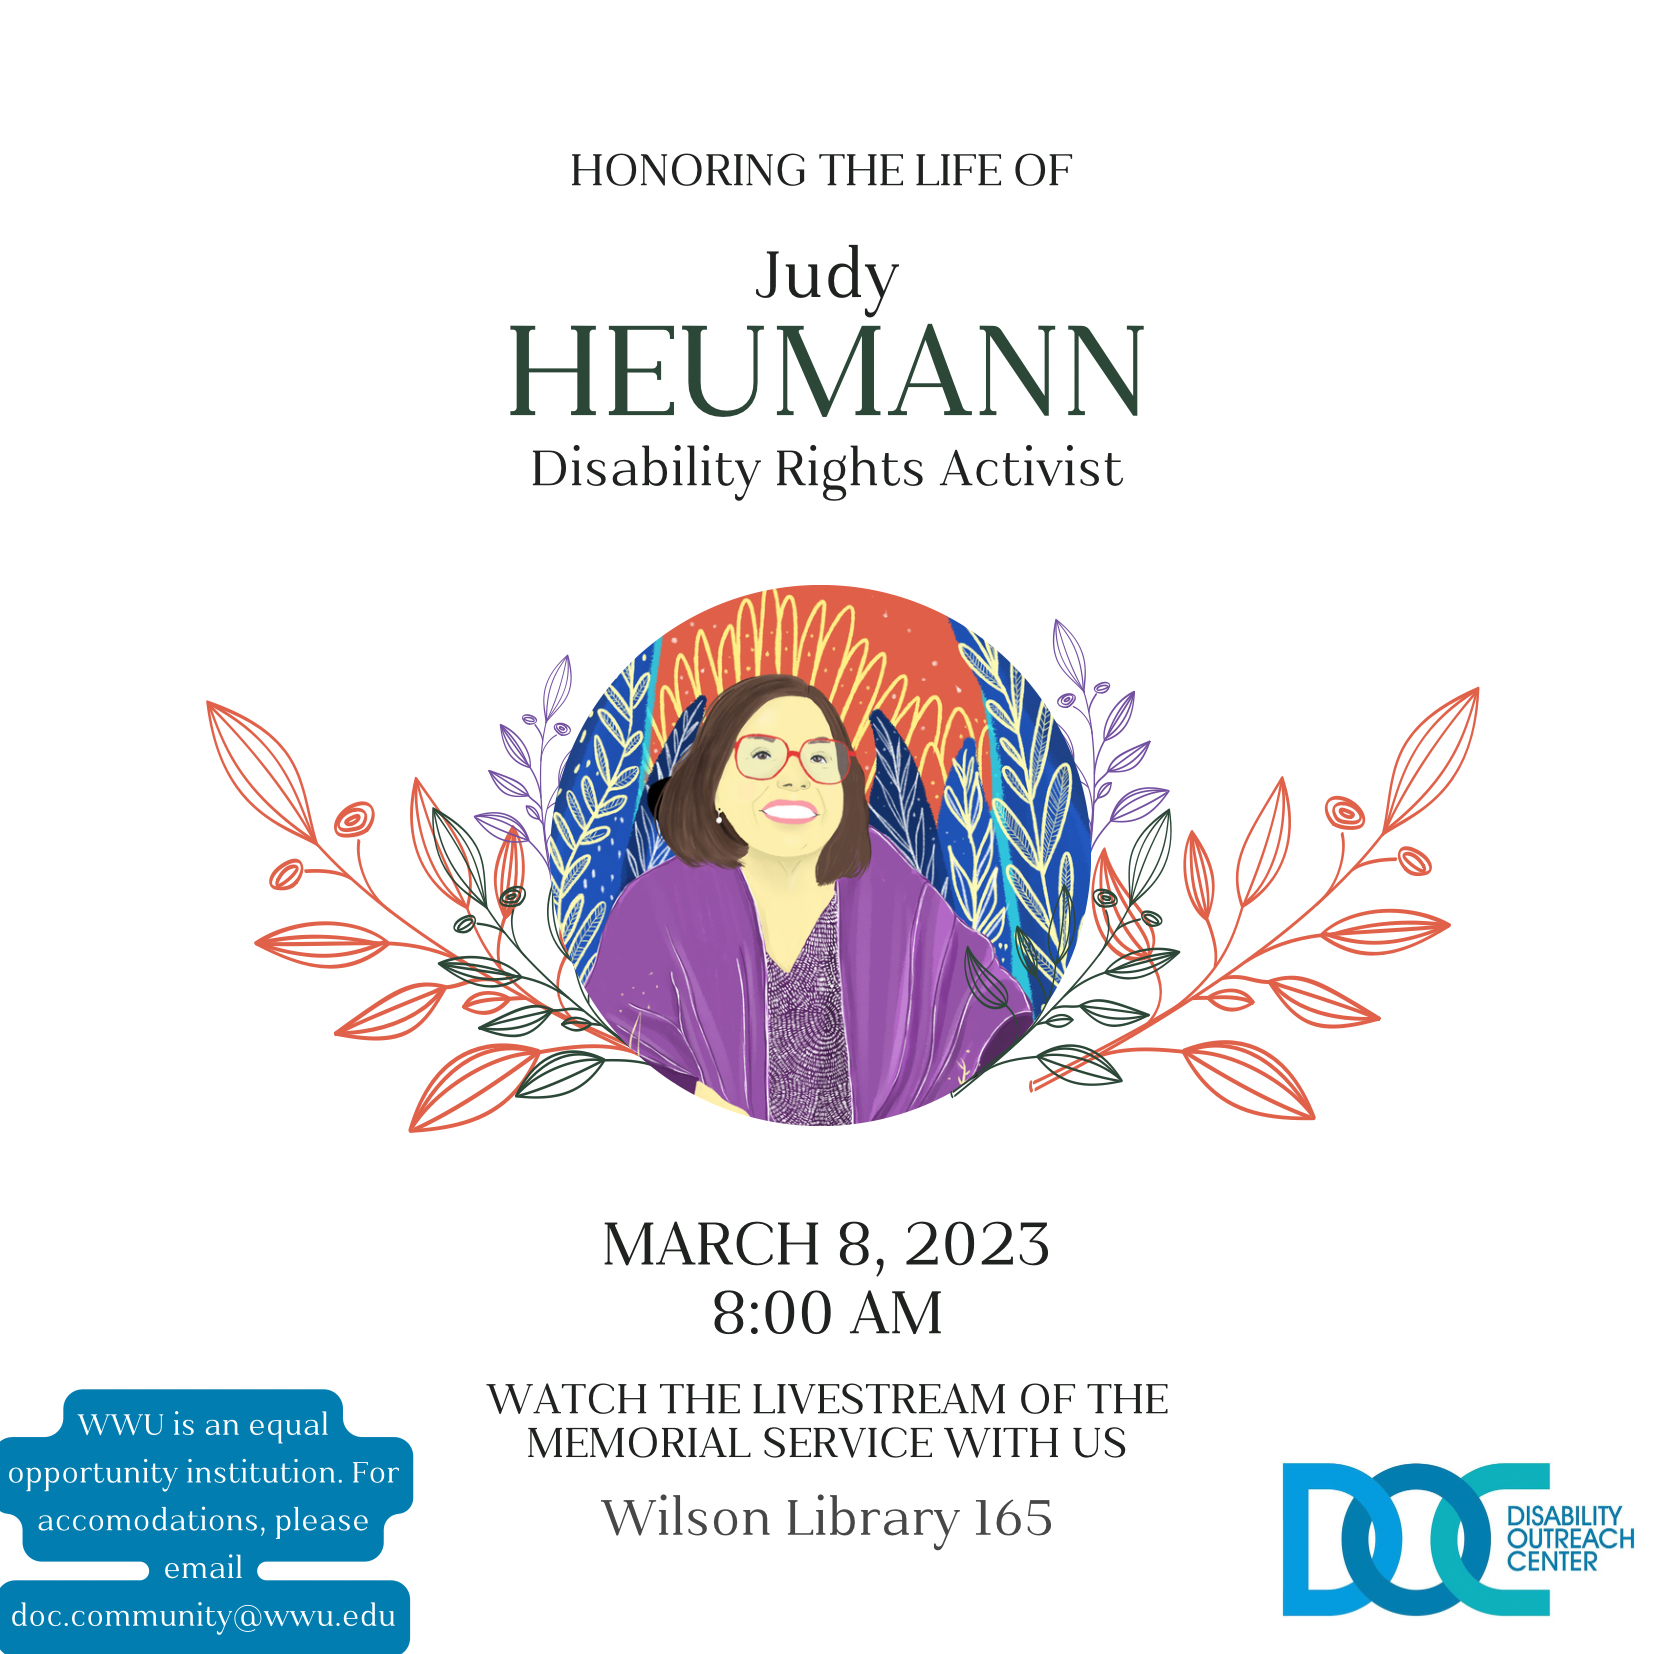 A flyer advertising a live stream of Judy Heumann’s memorial service in Wilson Library 165 at 8 AM on March 8